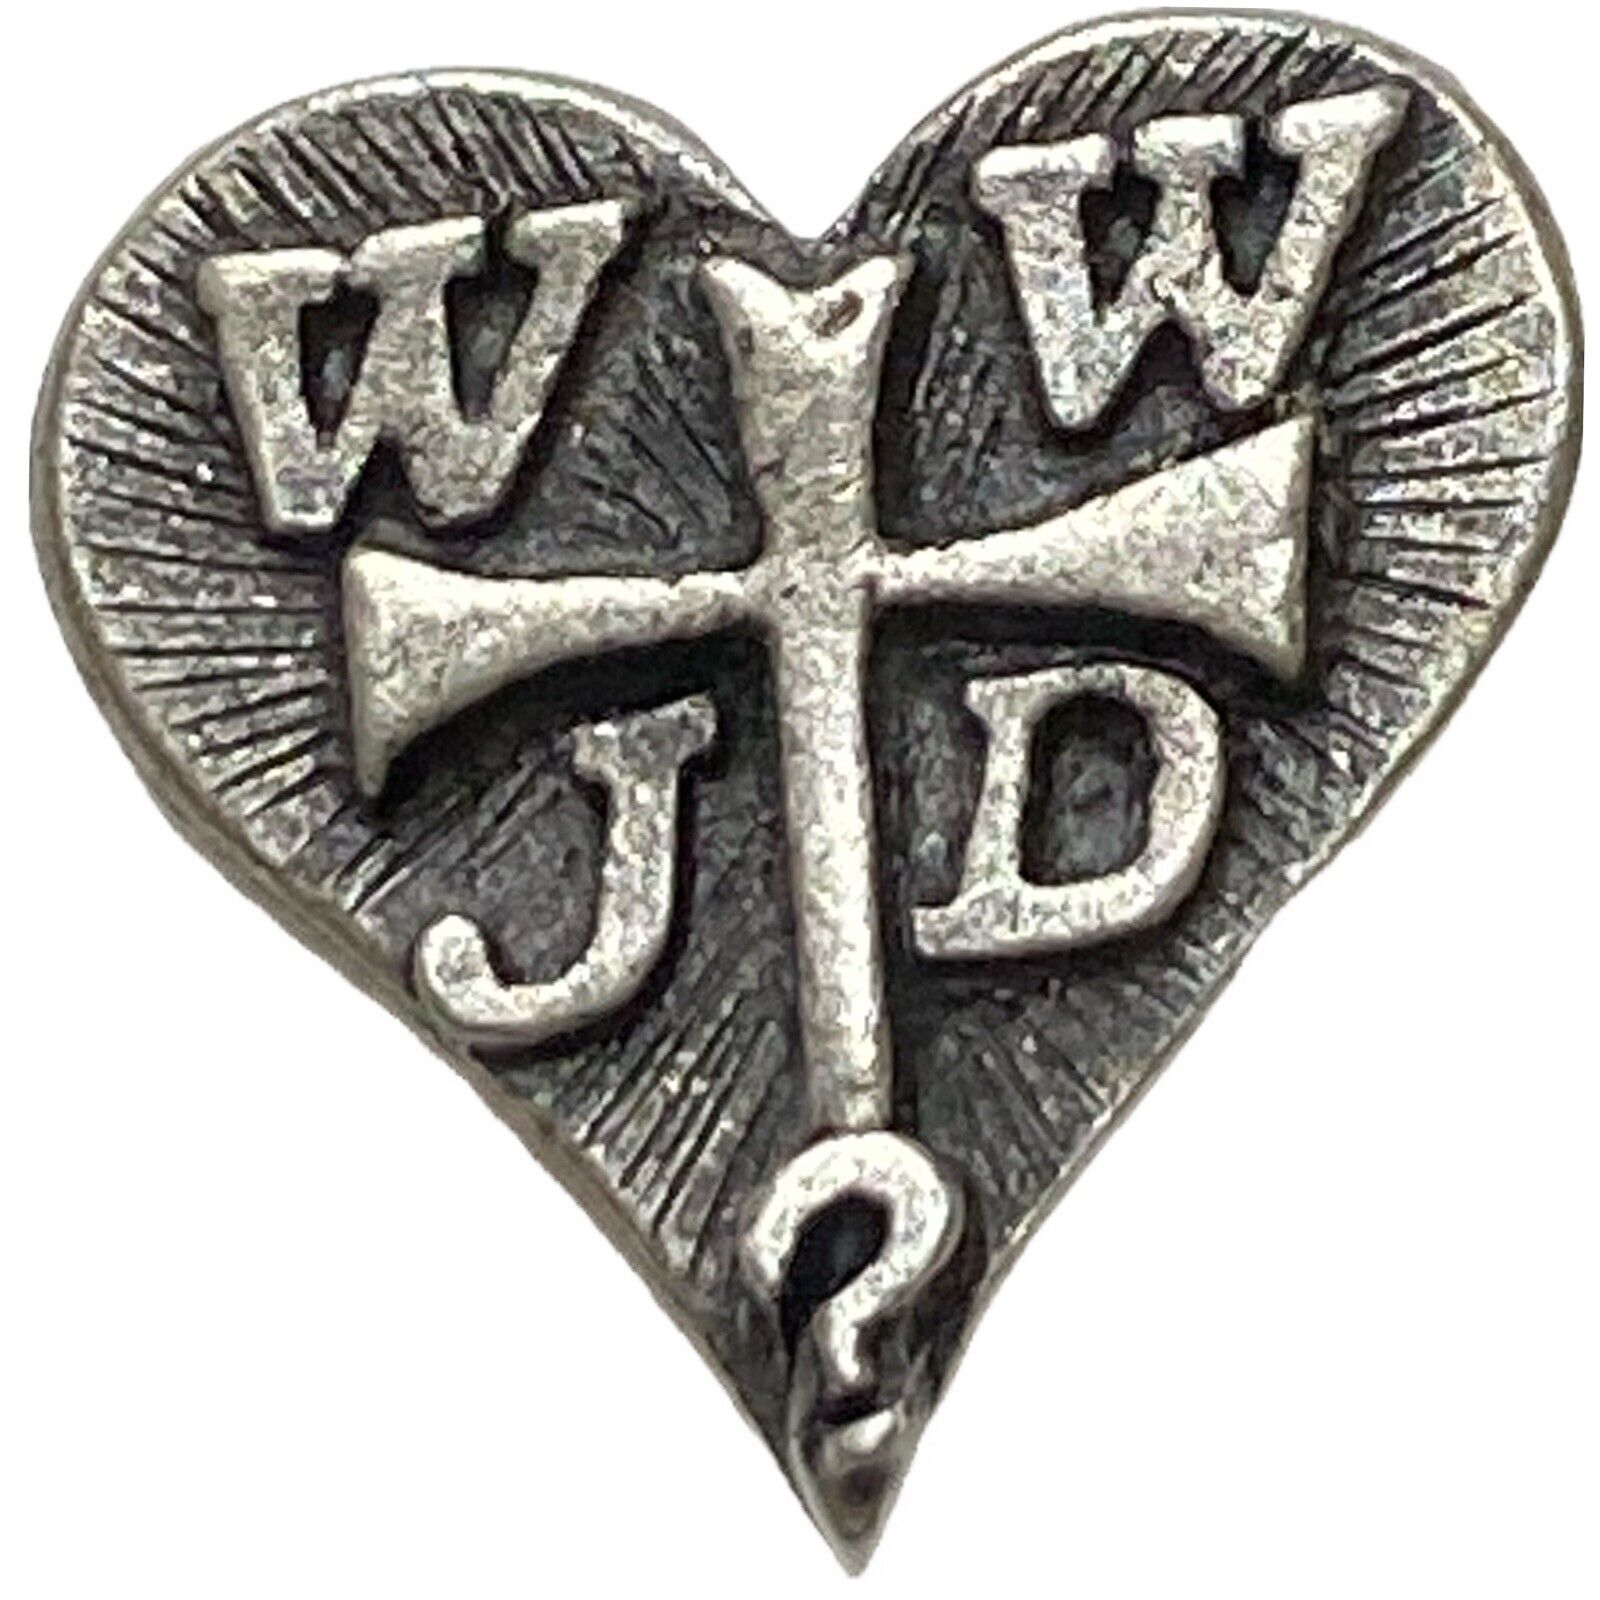 WWJD WHAT WOULD JESUS DO PEWTER LAPEL PIN heart